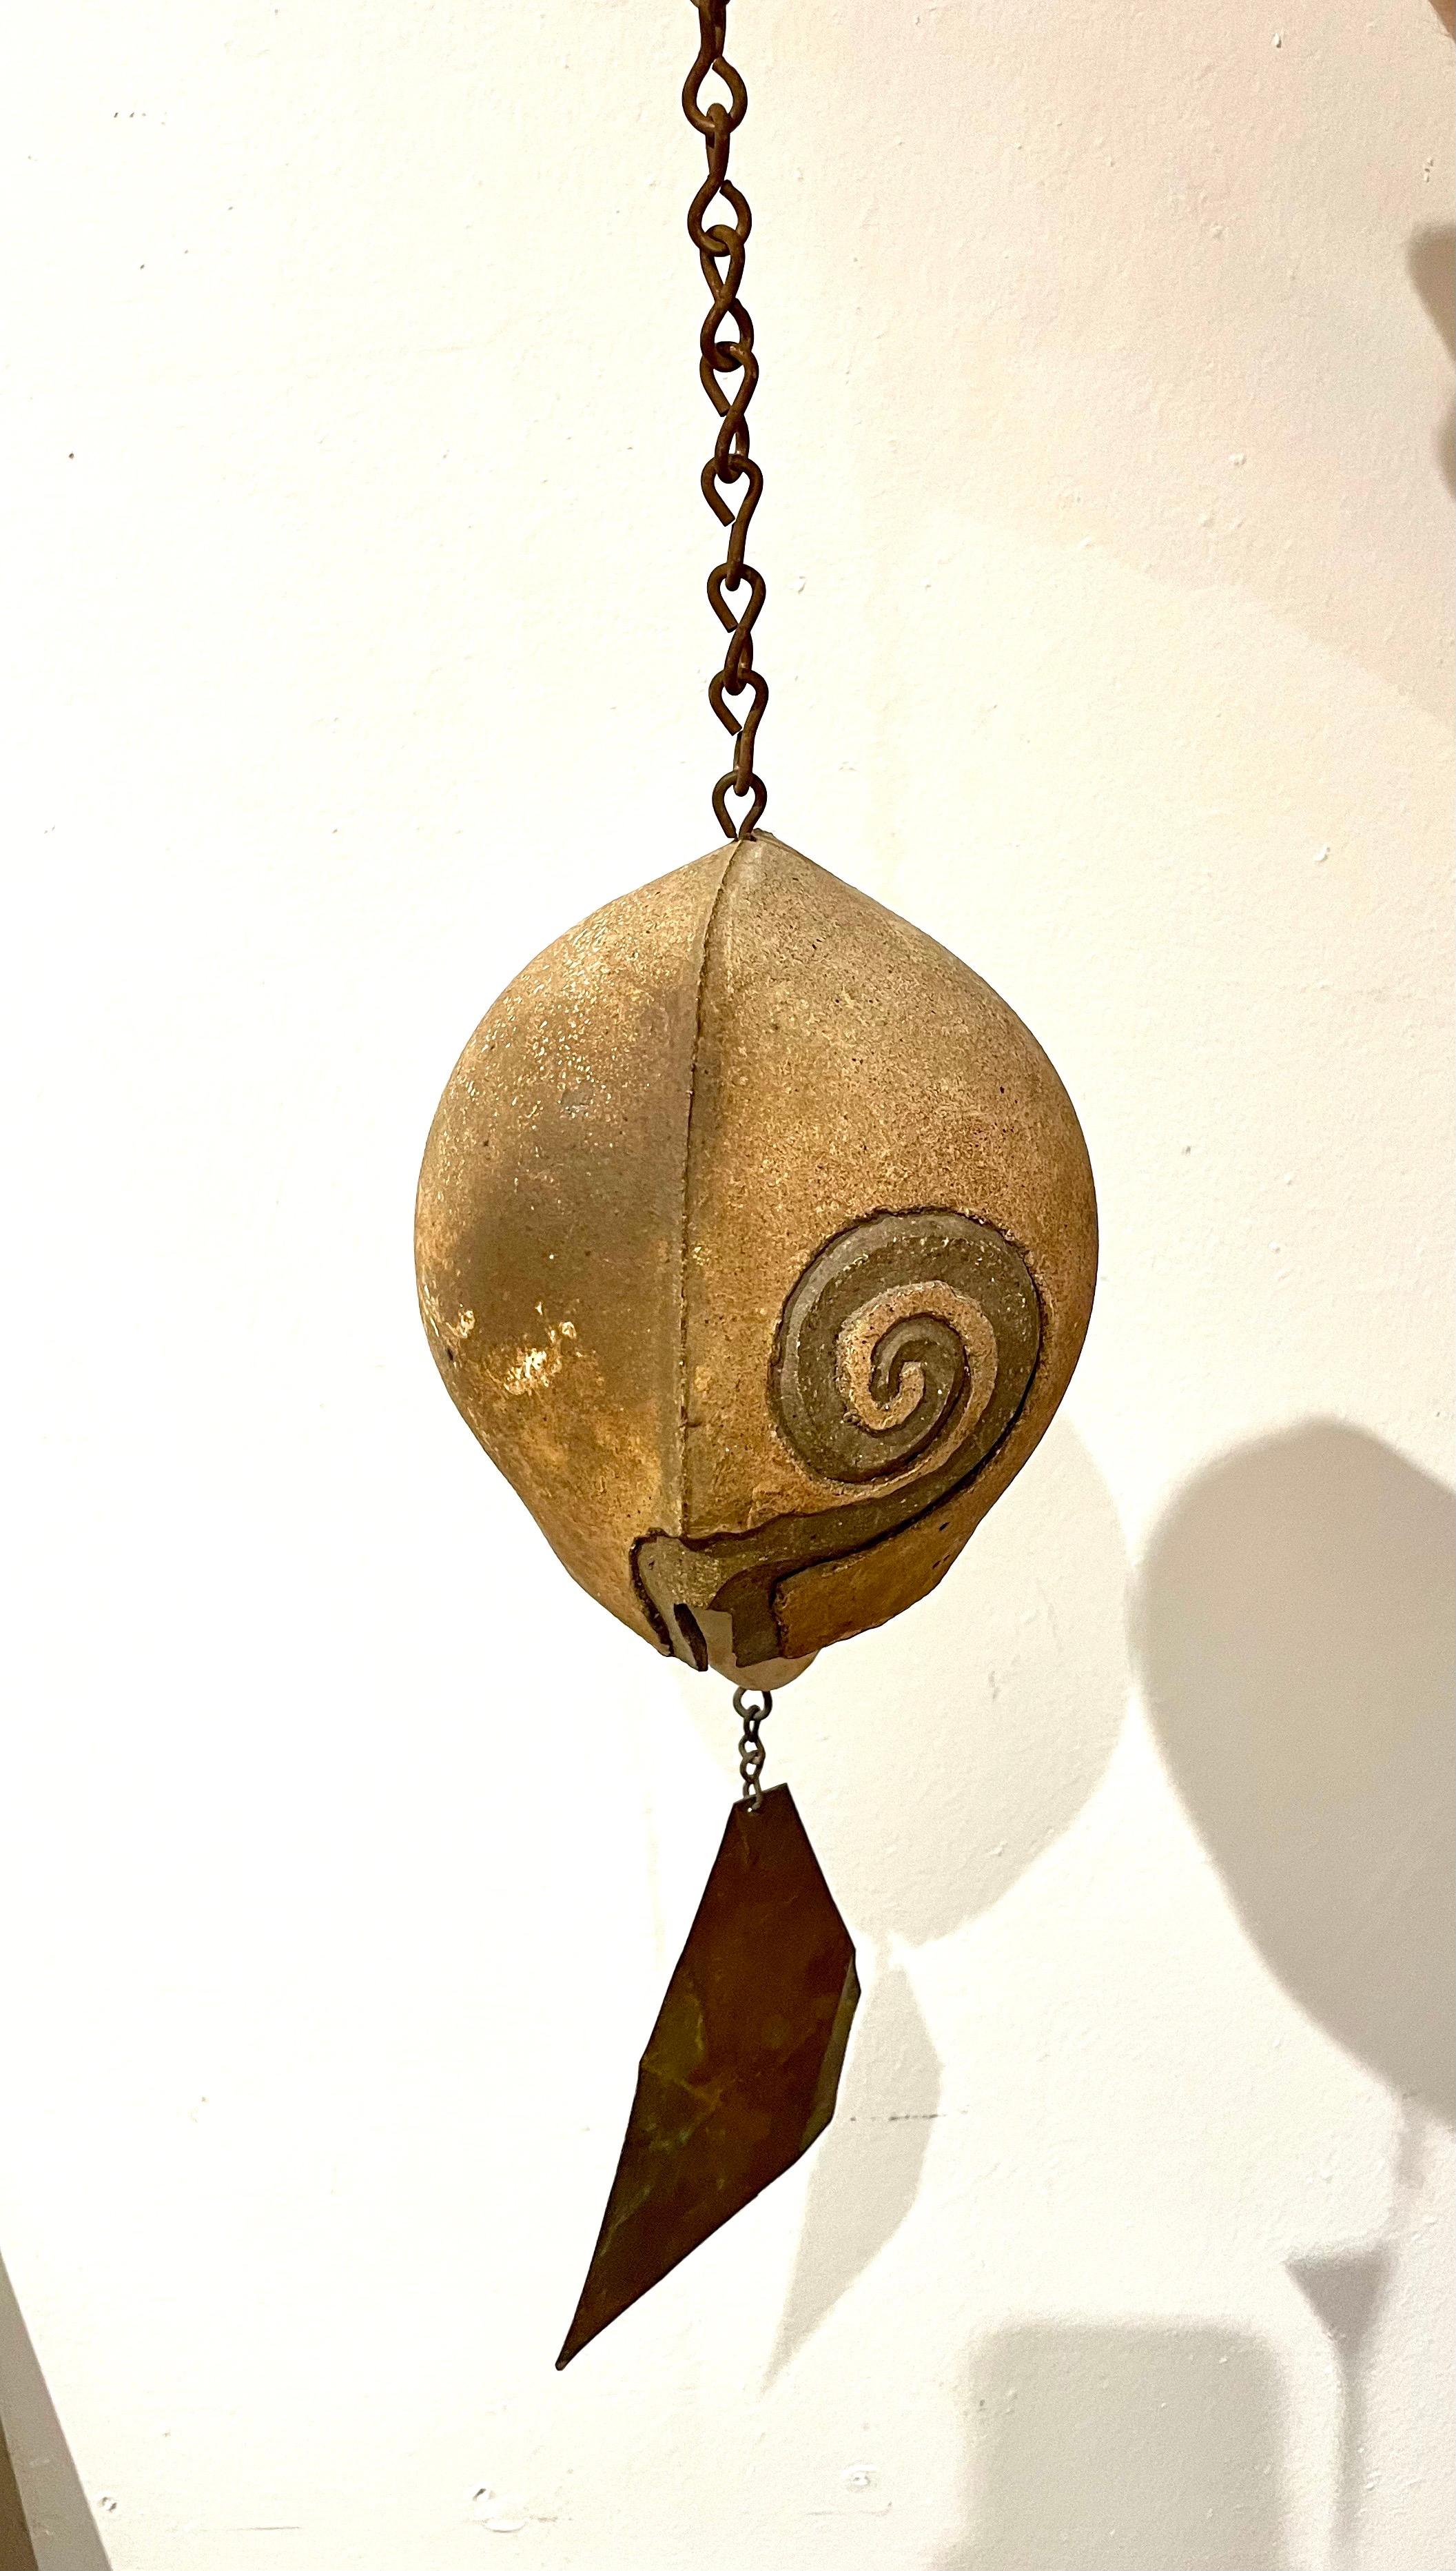 North American Early Ceramic Cosanti Bell by Paolo Soleri, 1950s